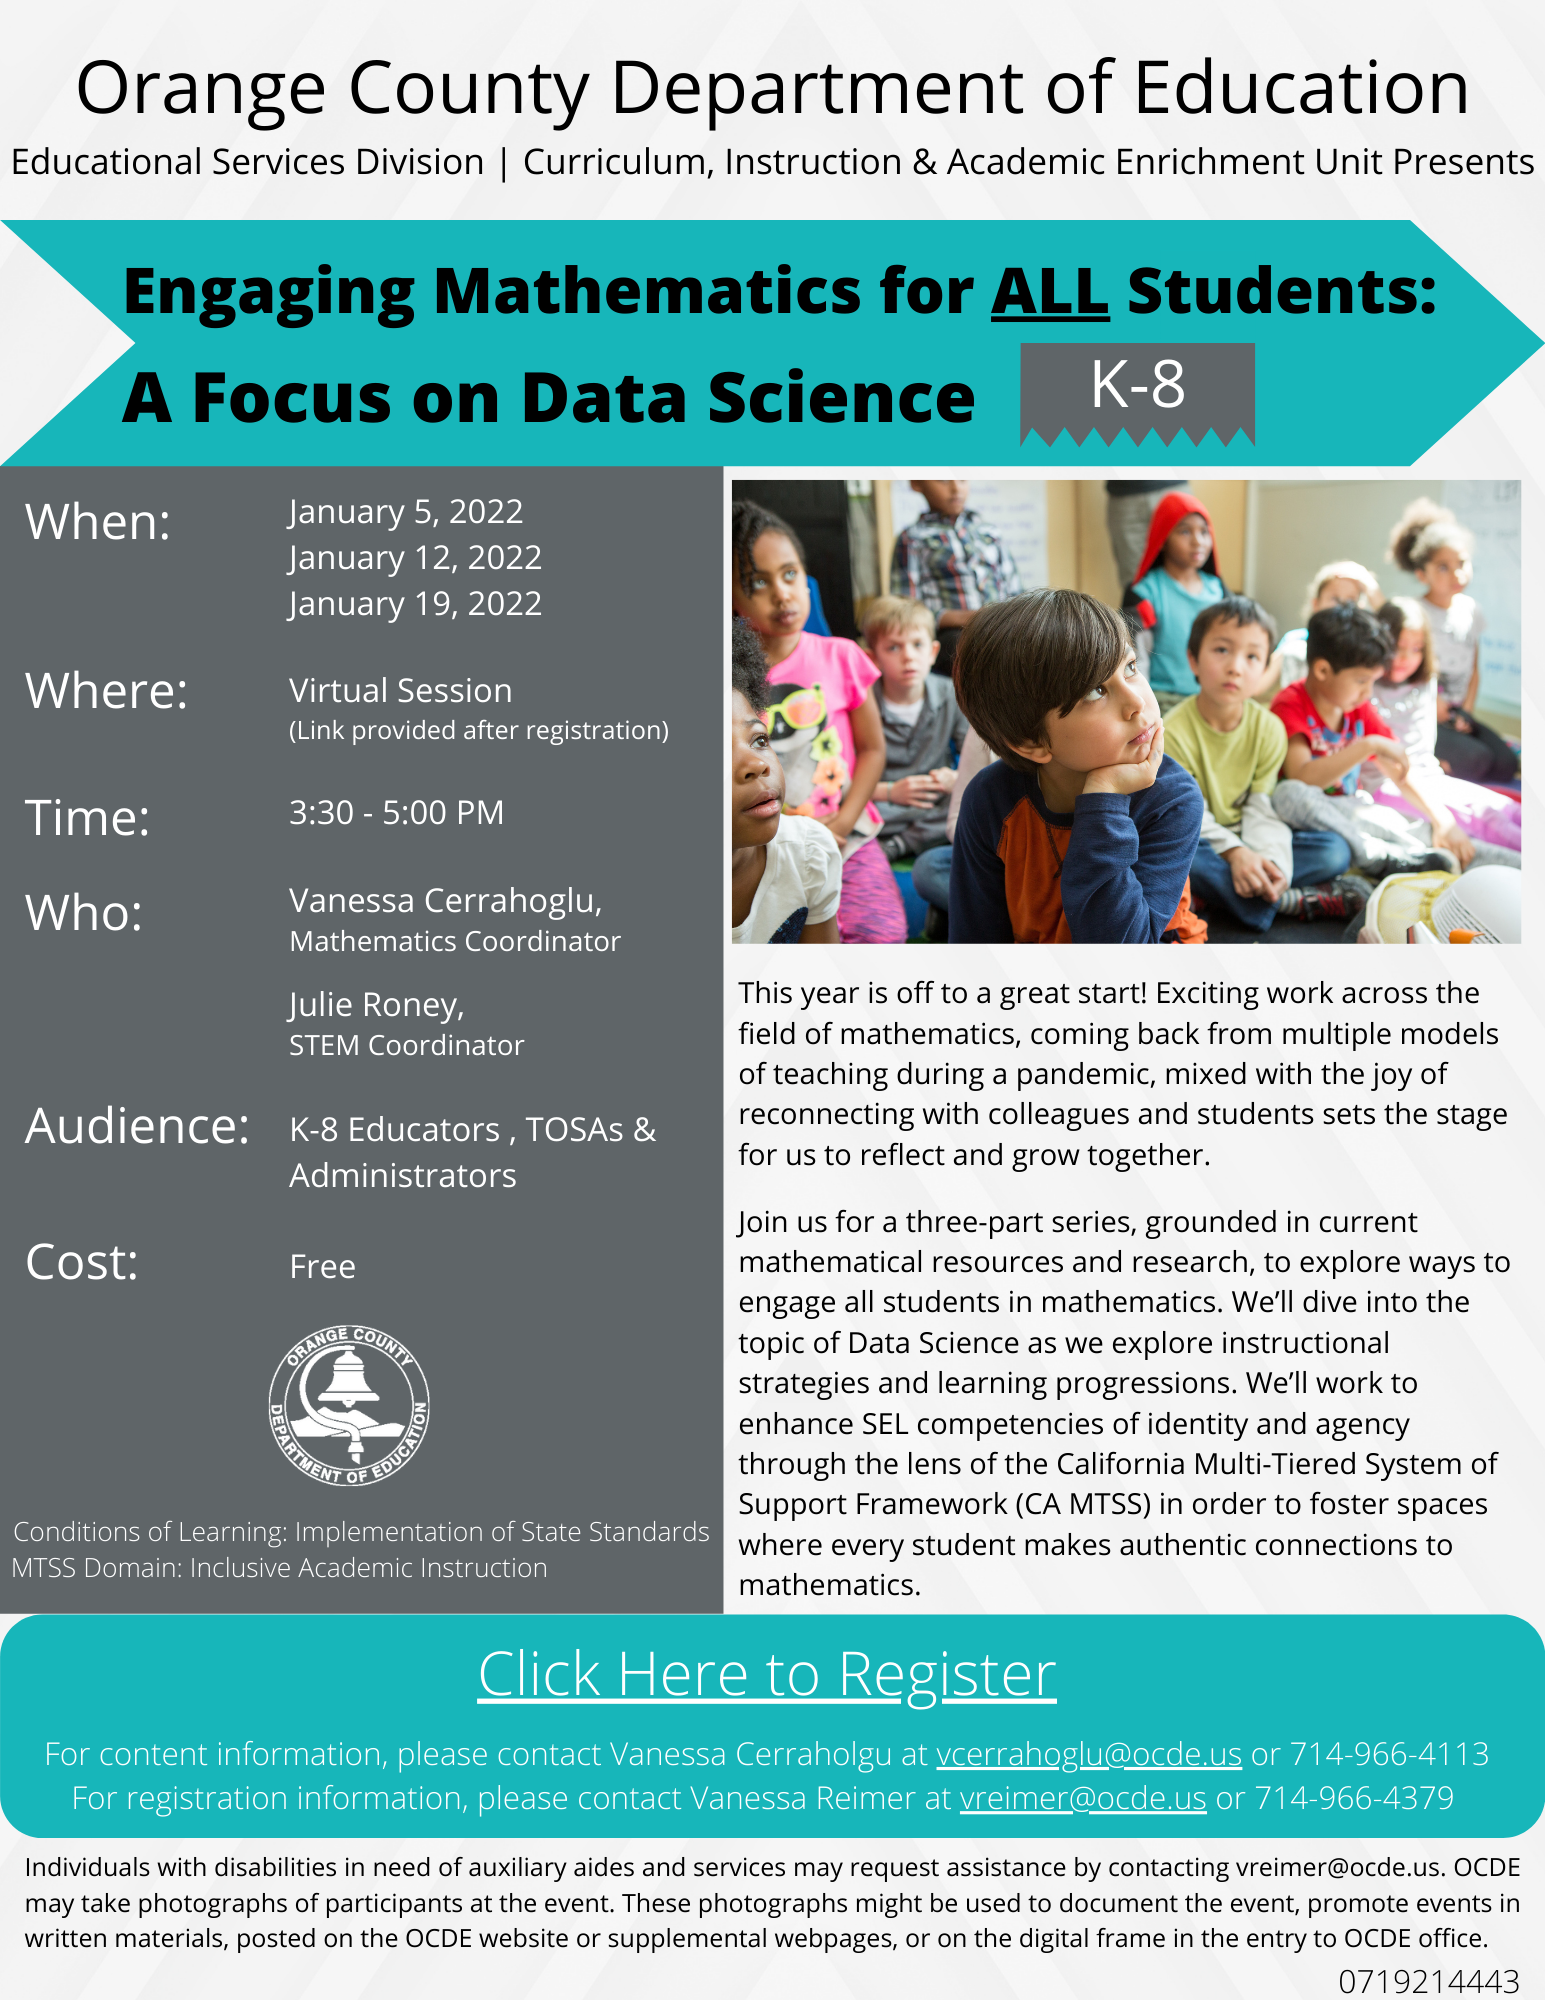 Engaging Mathematics for ALL Students - K-8 (1).png